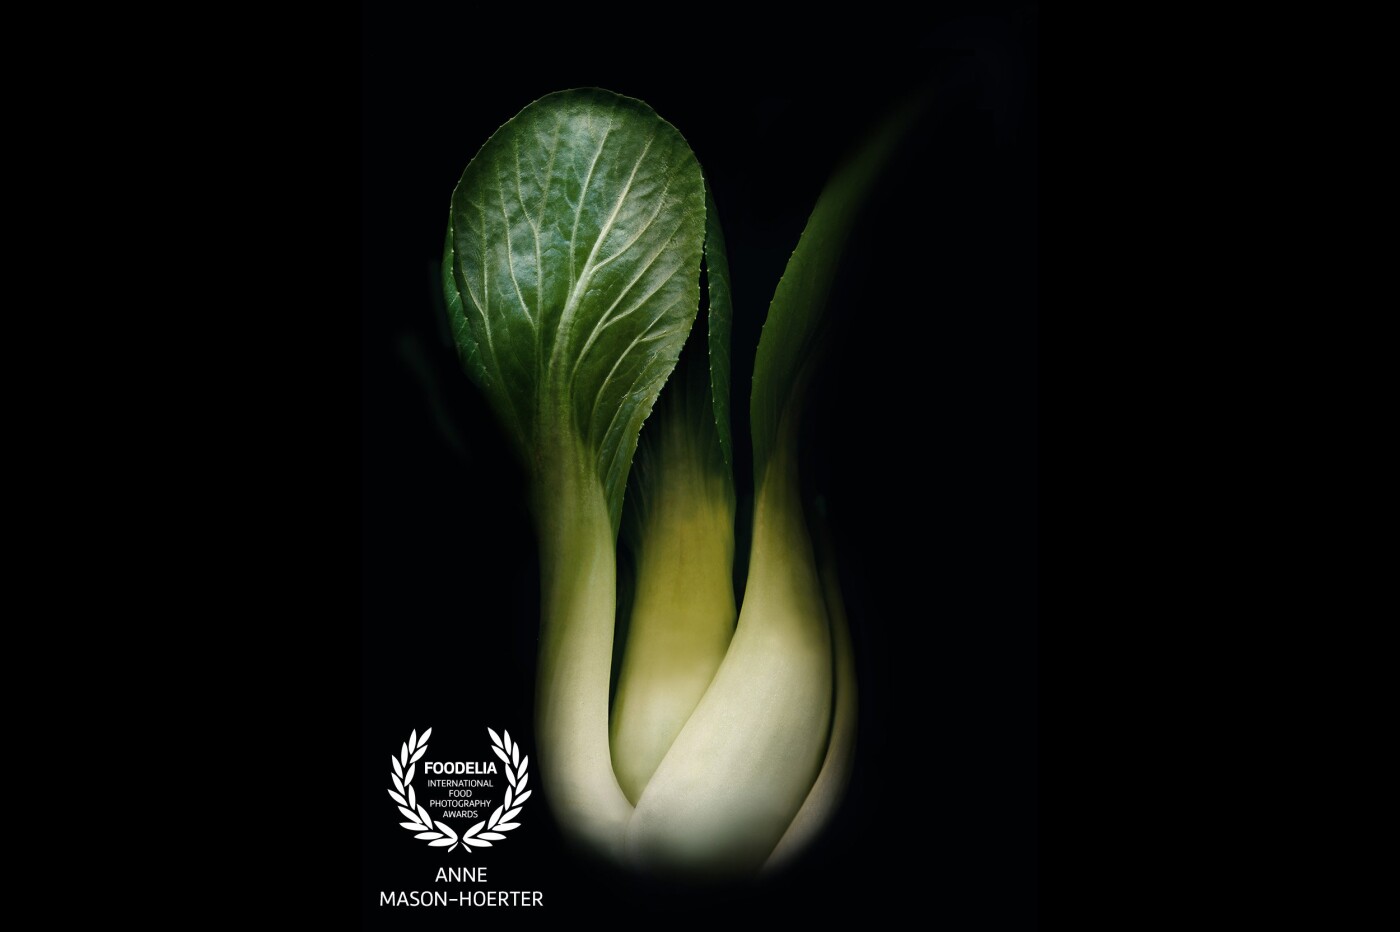 Multiple scanned data combined with multiple Leica digital data of a Bok choy or also known as the Chinese cabbage. This variety does not form heads but rather have green leaf blades with lighter bulbous bottoms instead, forming a cluster reminiscent of mustard greens. The taste of this cabbage is very mellow, with its own unique mild, peppery spice.<br />
There is a combination of over 30 single images.